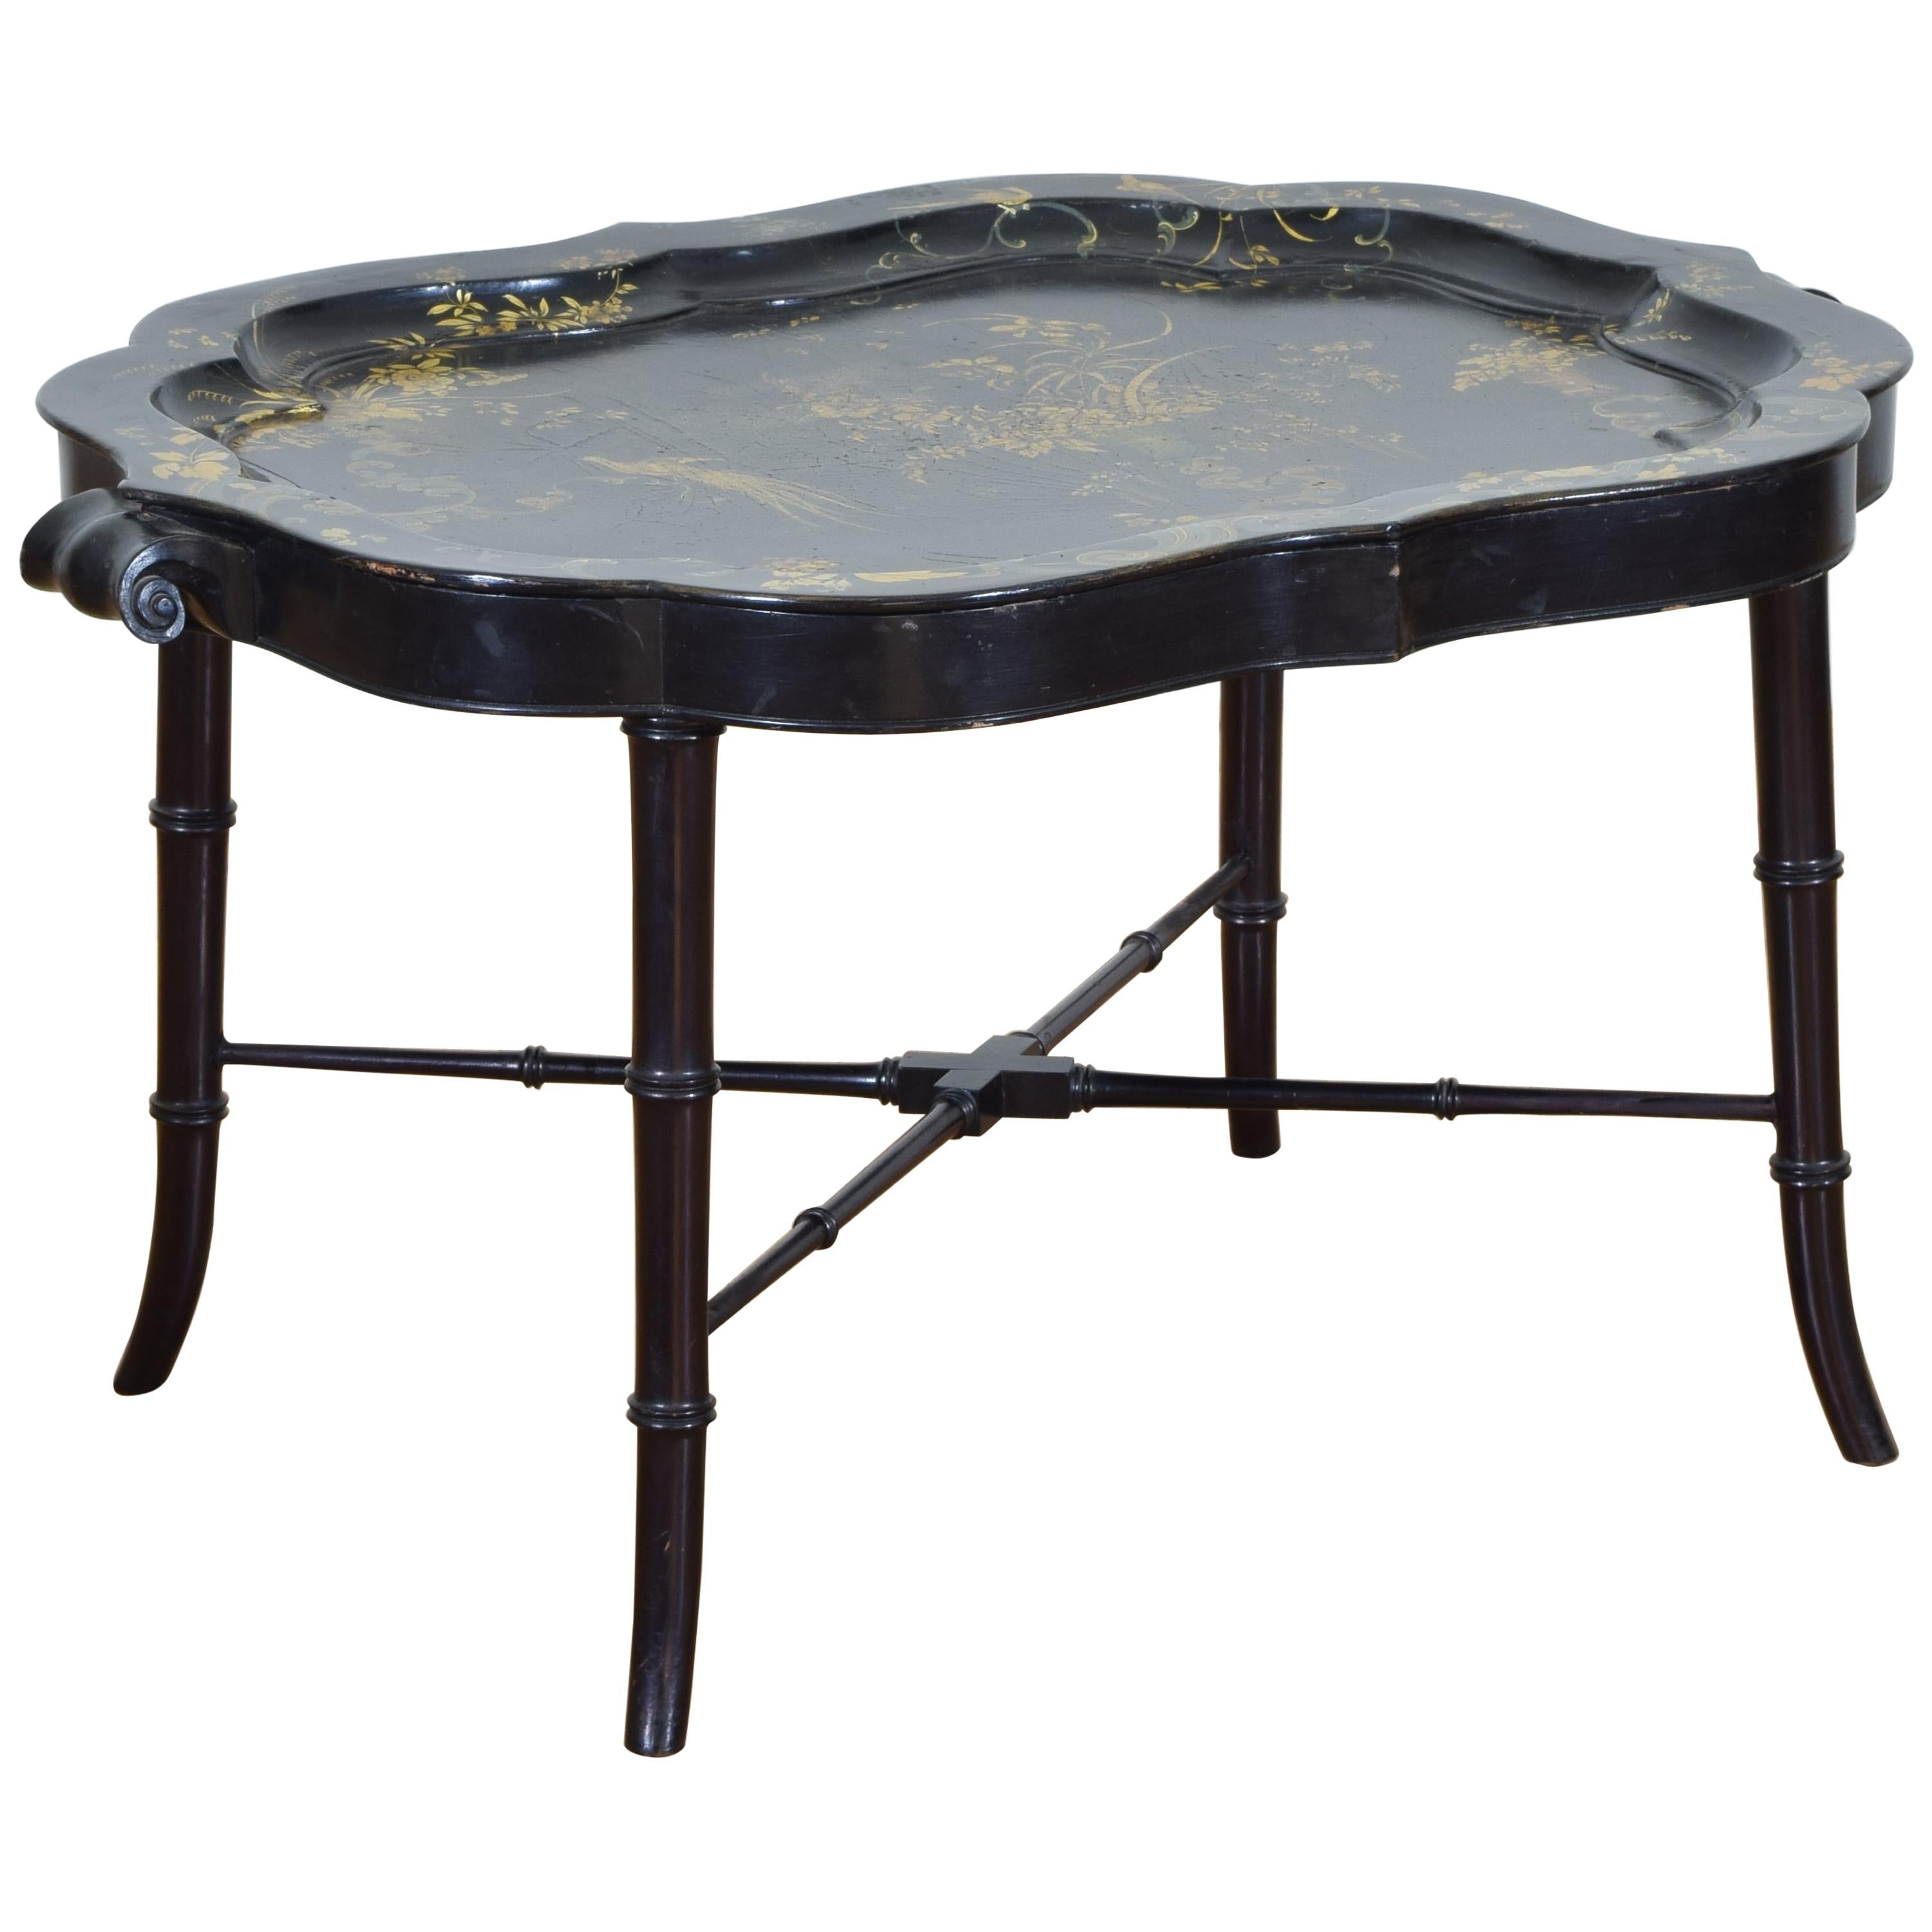 English Chinoiserie Tray Table, Early 19th Century